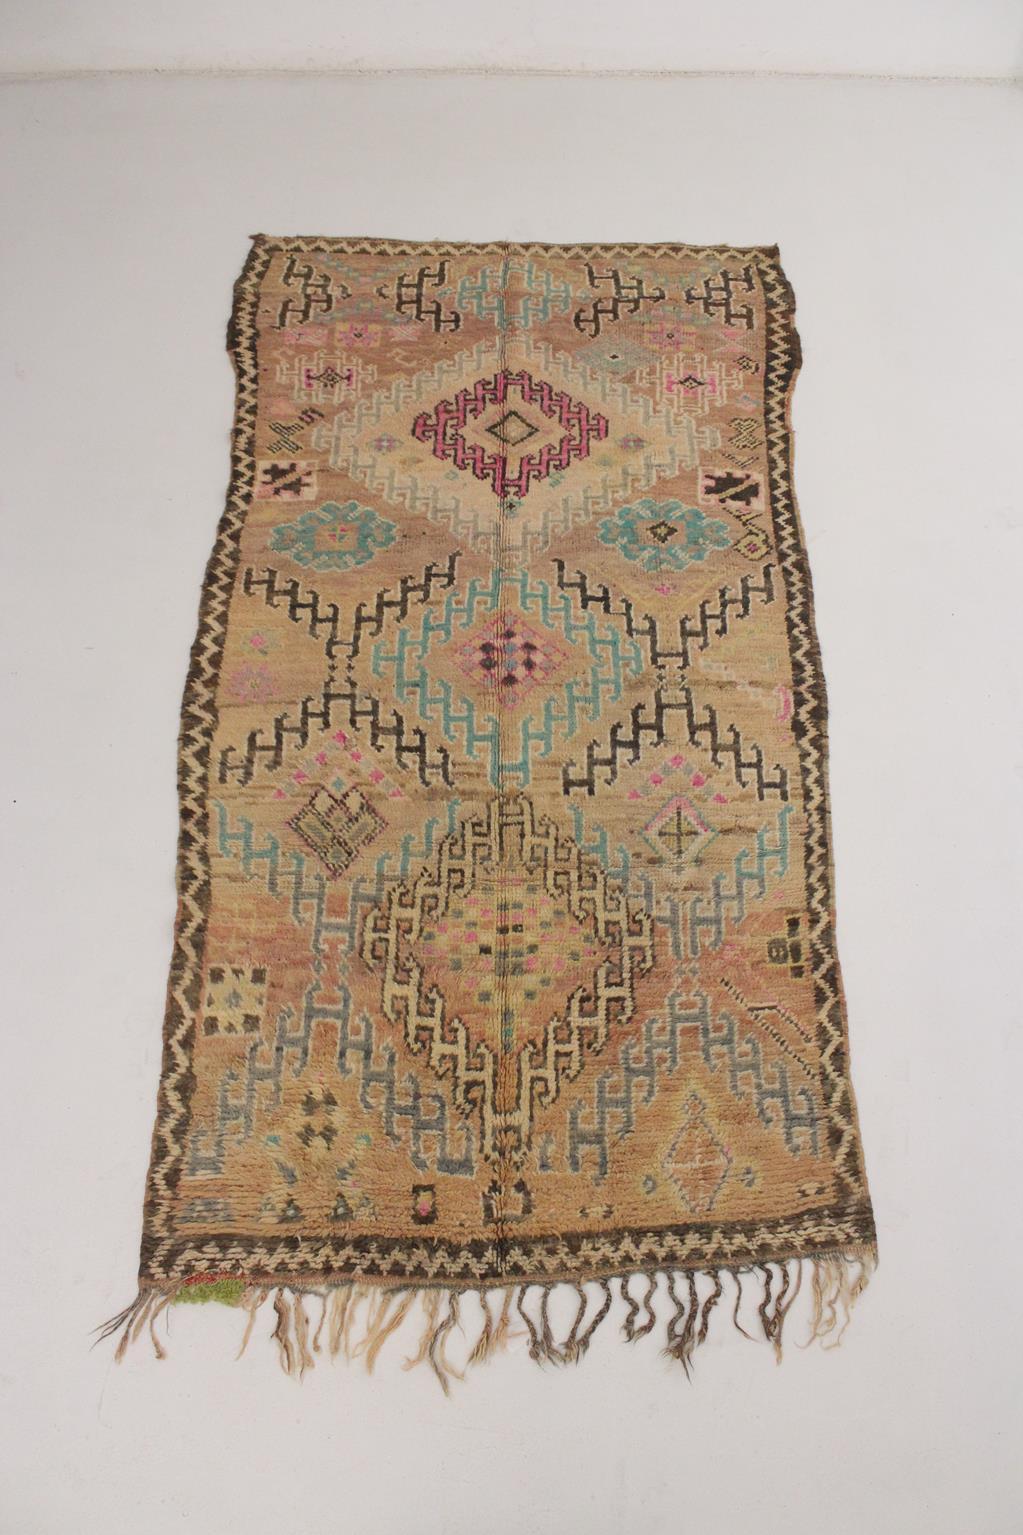 I selected that Boujad rug from piles of carpets because I think that it's a lovely piece with such sweet colors! I would call the main background color a dusty peach, with black, pink, cream and turquoise designs like a repeted, traditional hooked